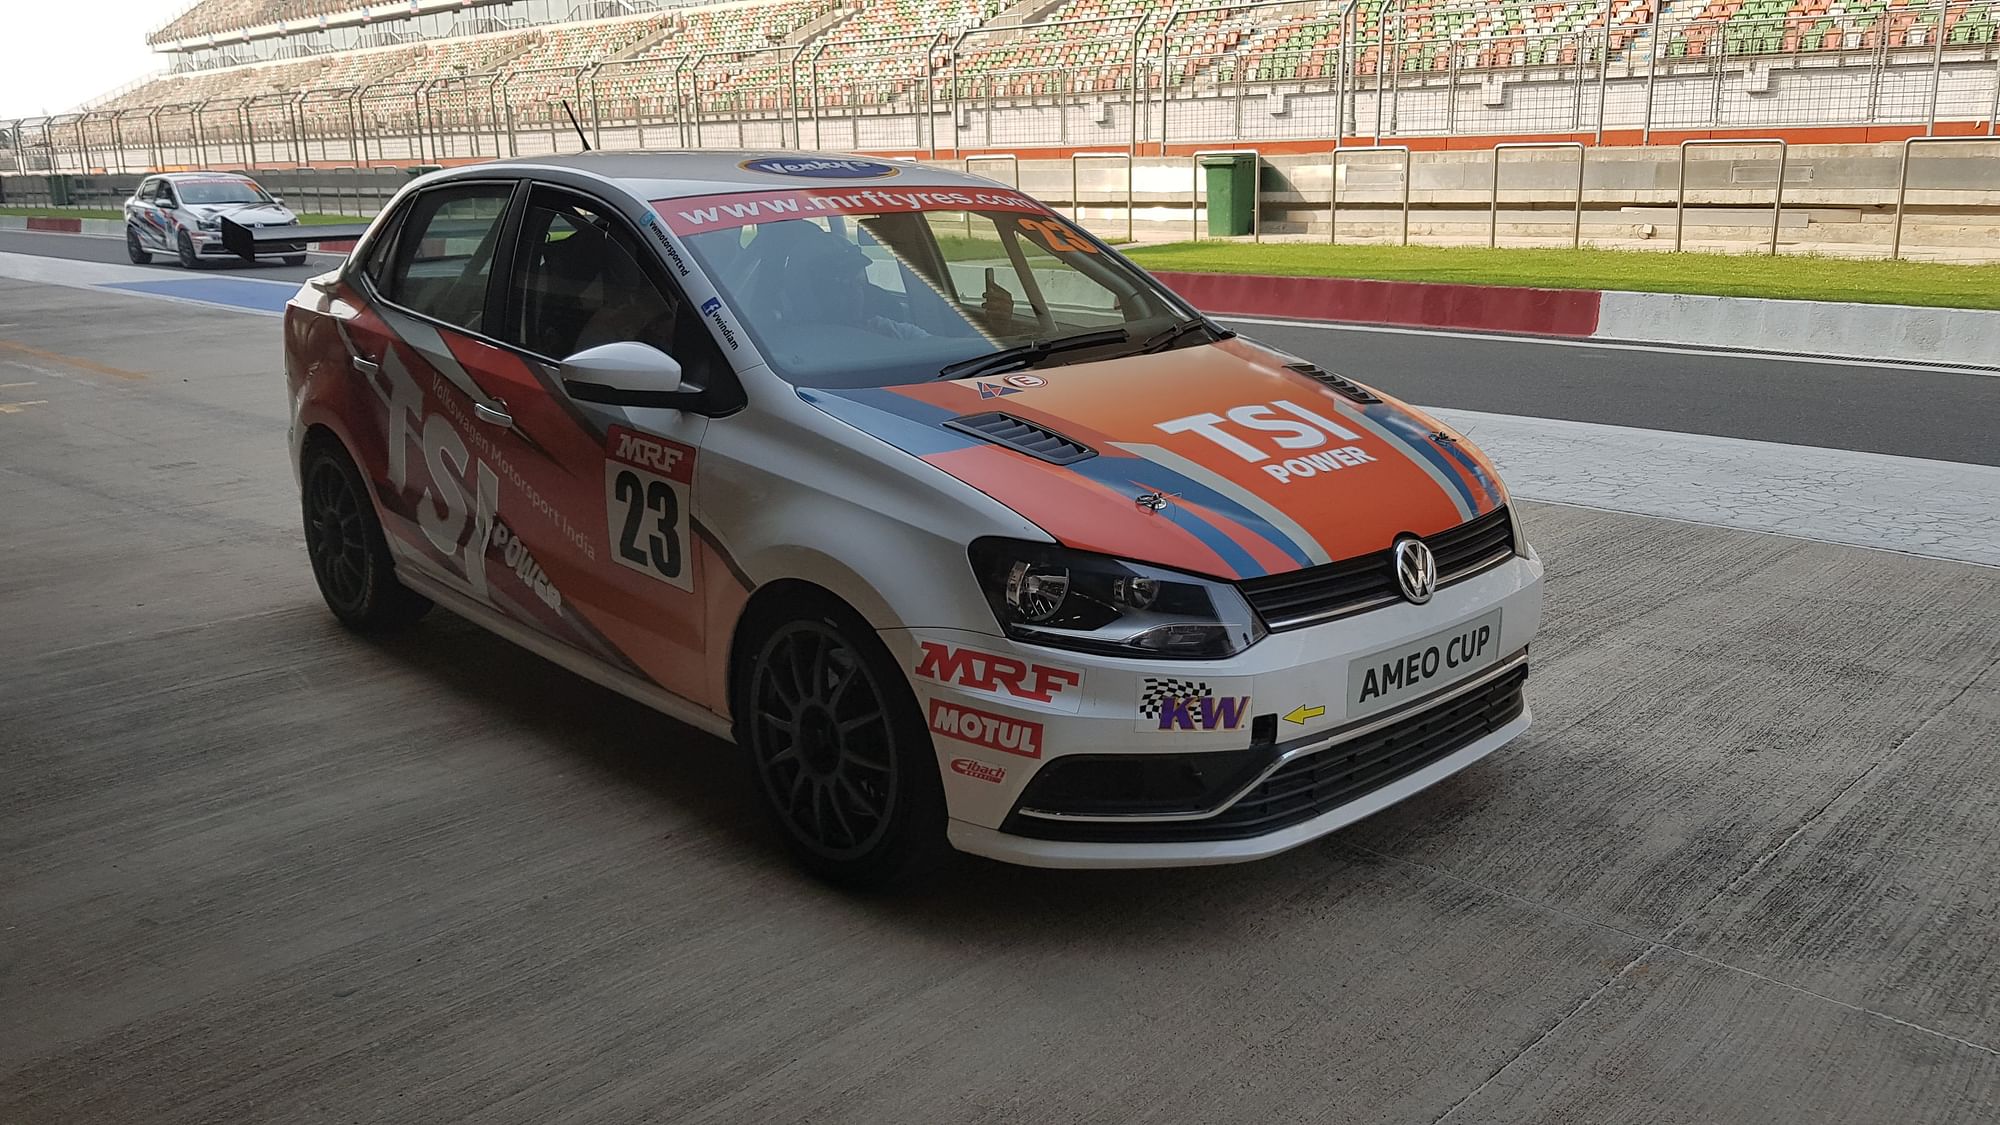 The Volkswagen Ameo Cup Car with a 1.8 litre TSI (turbo-petrol) engine.&nbsp;